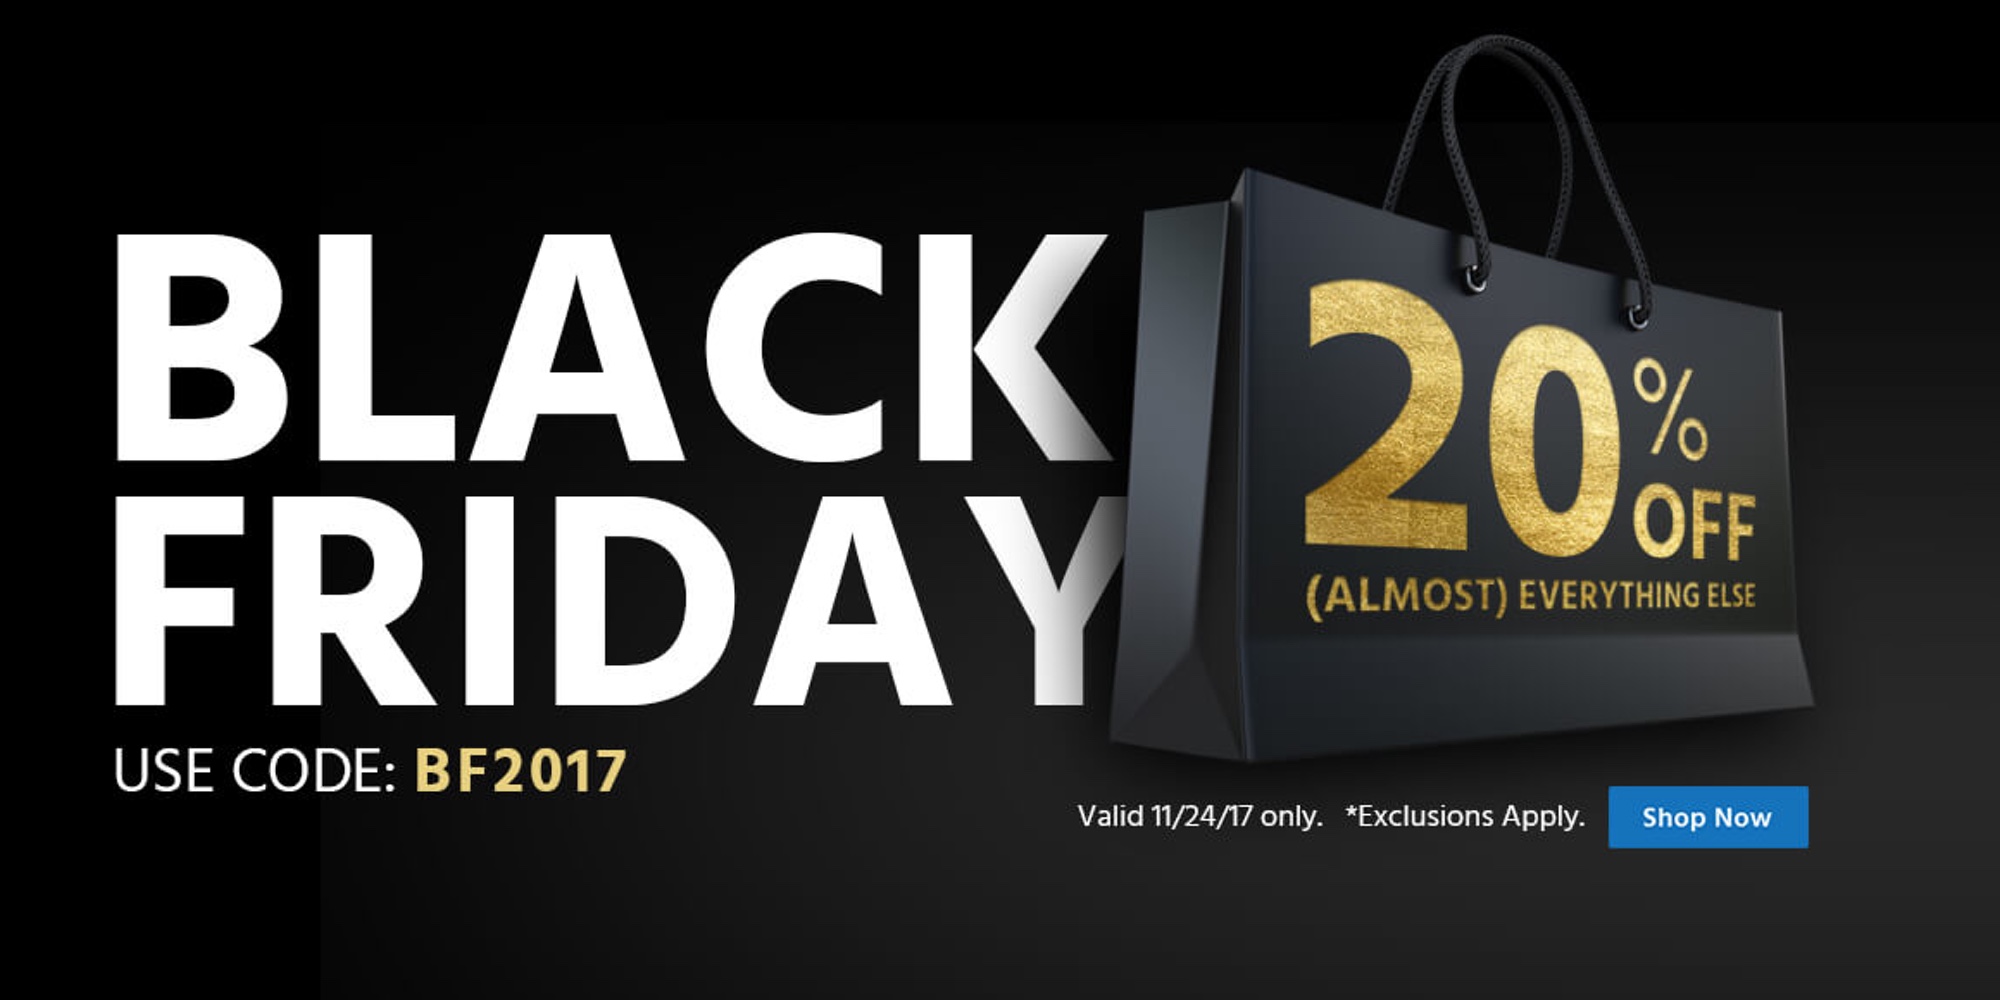 Monoprice Black Friday coupon code takes 20% off sitewide: cables - What Was The Chalfon Black Friday Deal